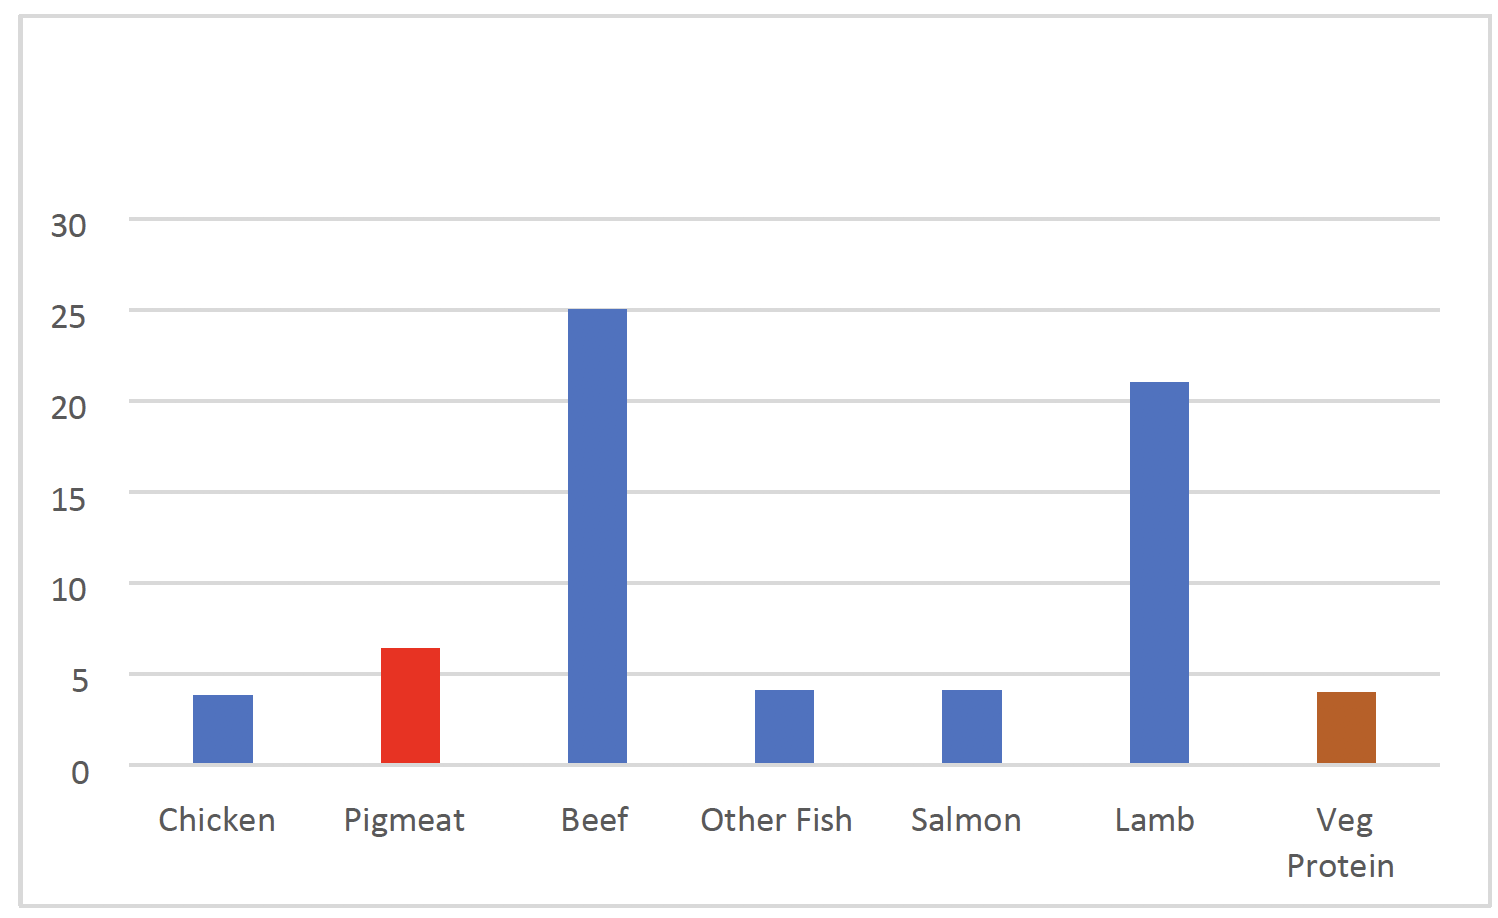 Bar chart of relative carbon footprints of the main sources of protein produced in Scotland